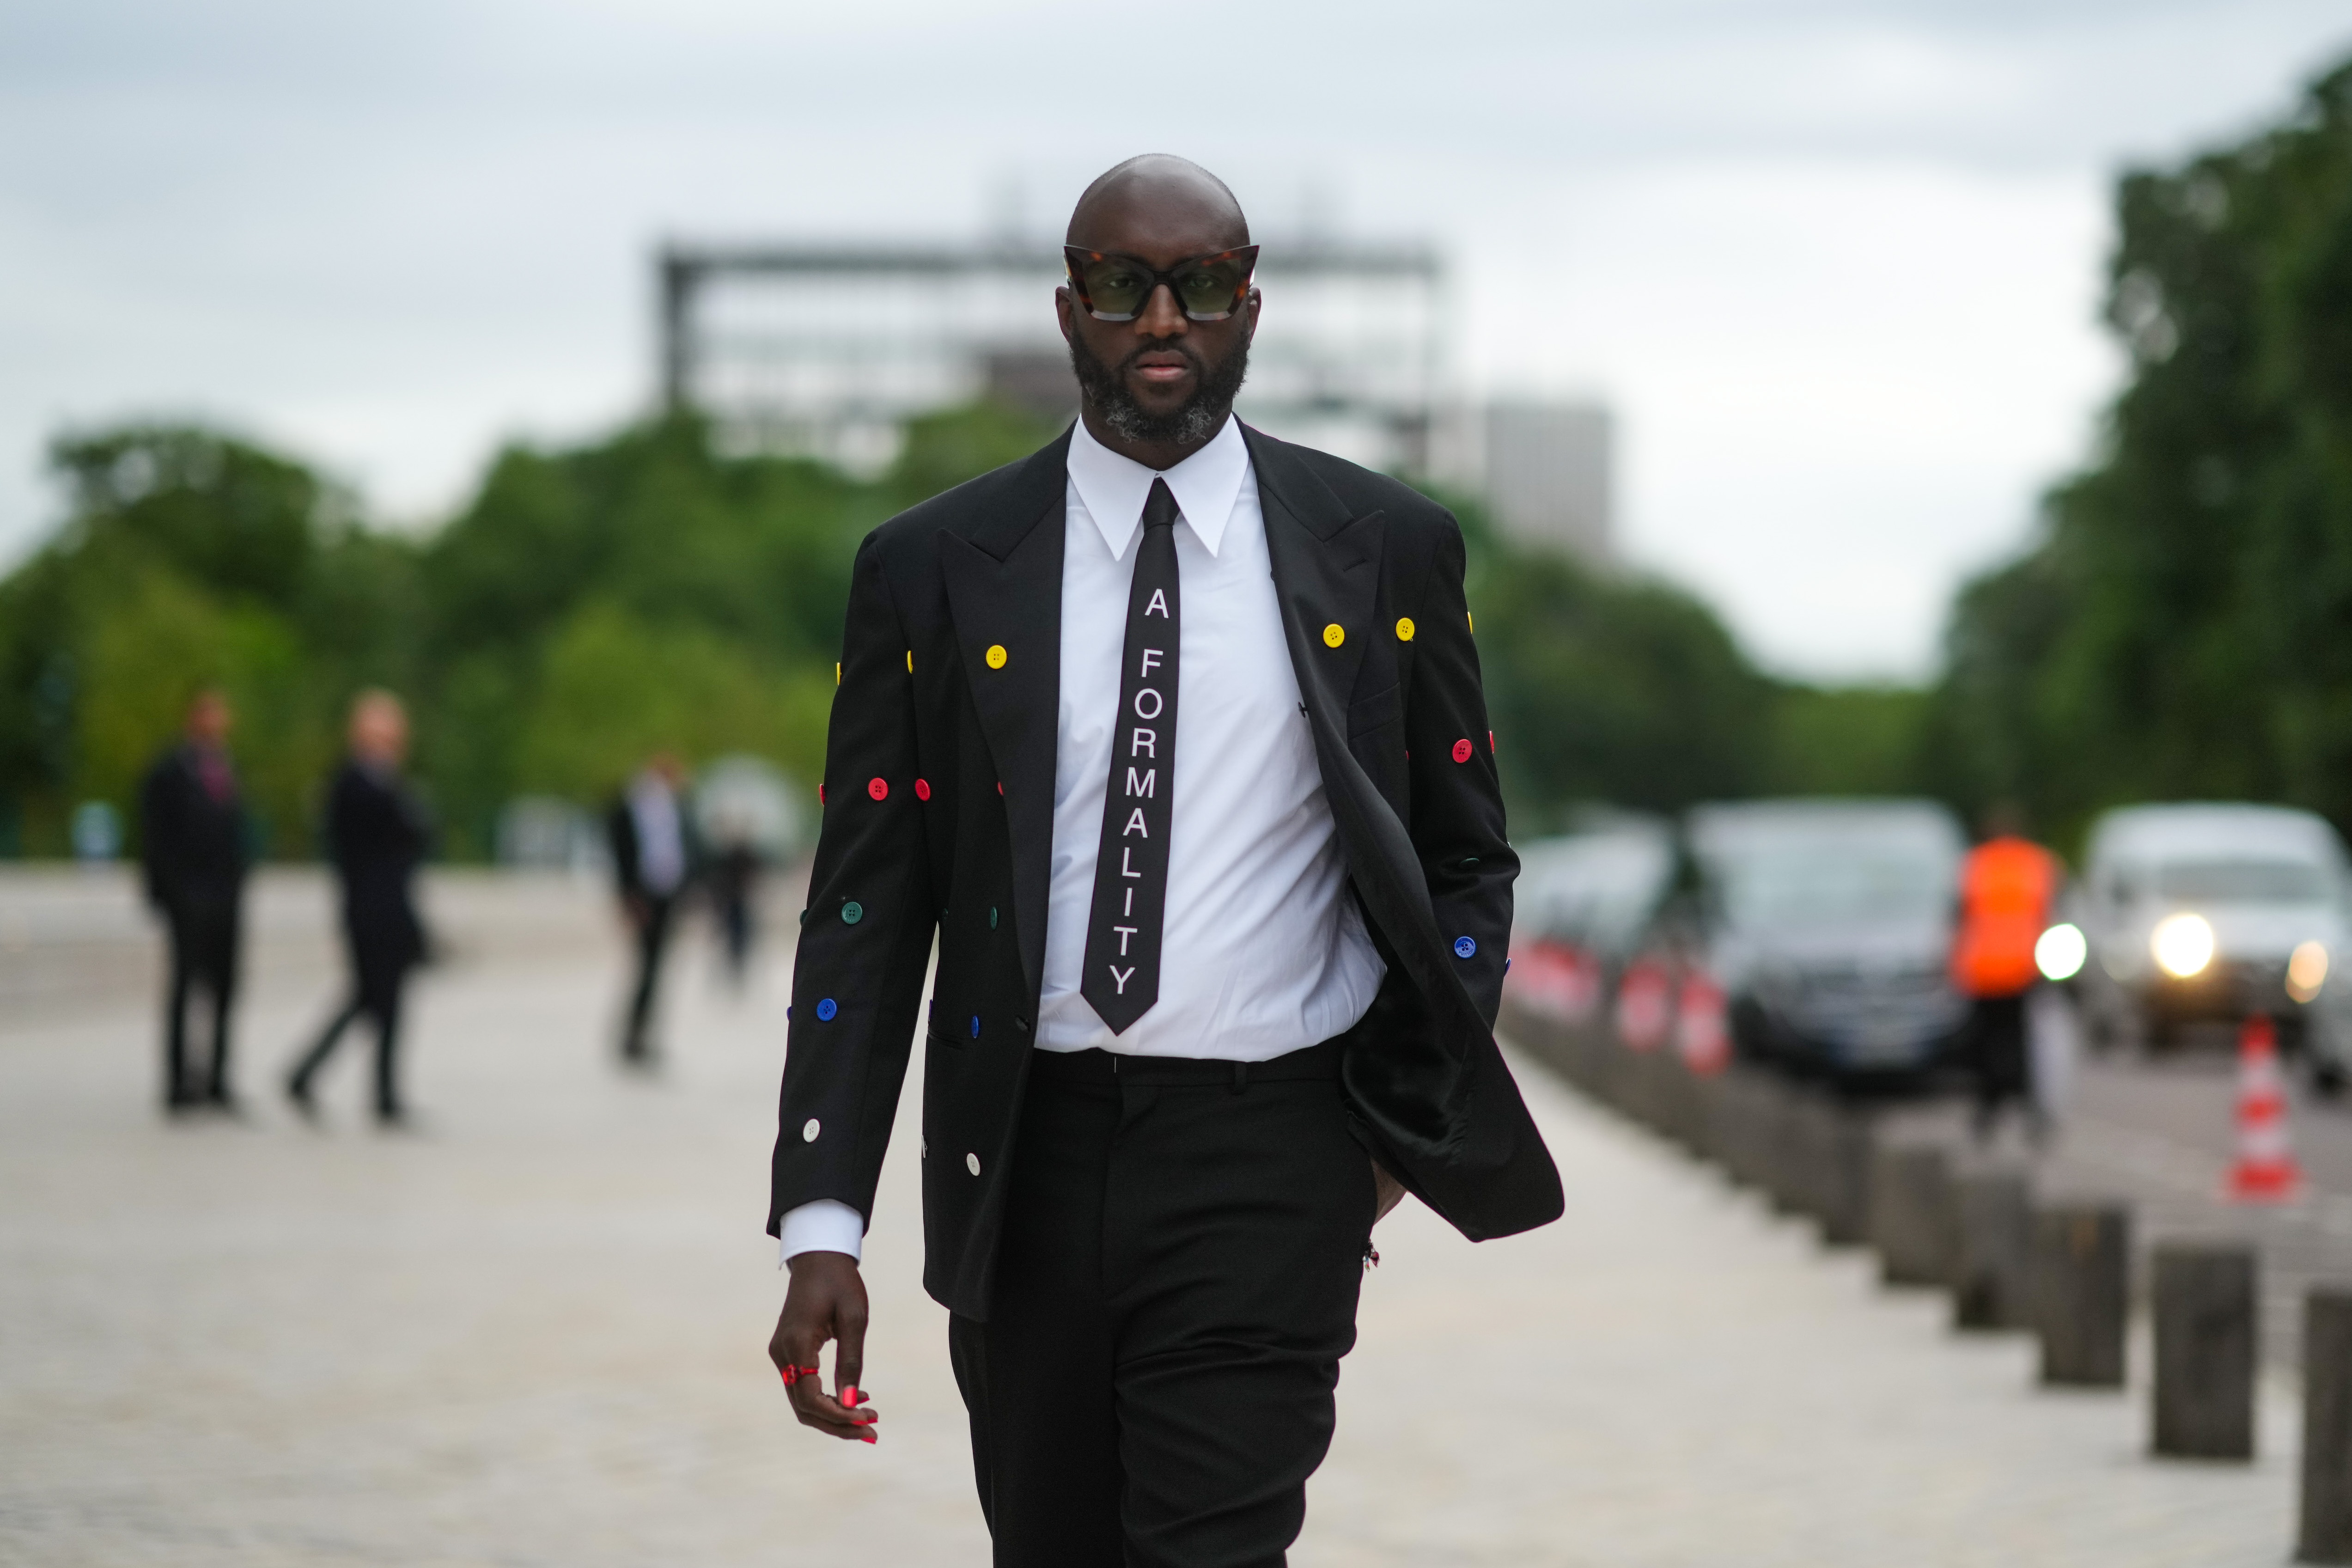 Virgil Abloh Is Honored at Louis Vuitton's Men's Show in Miami